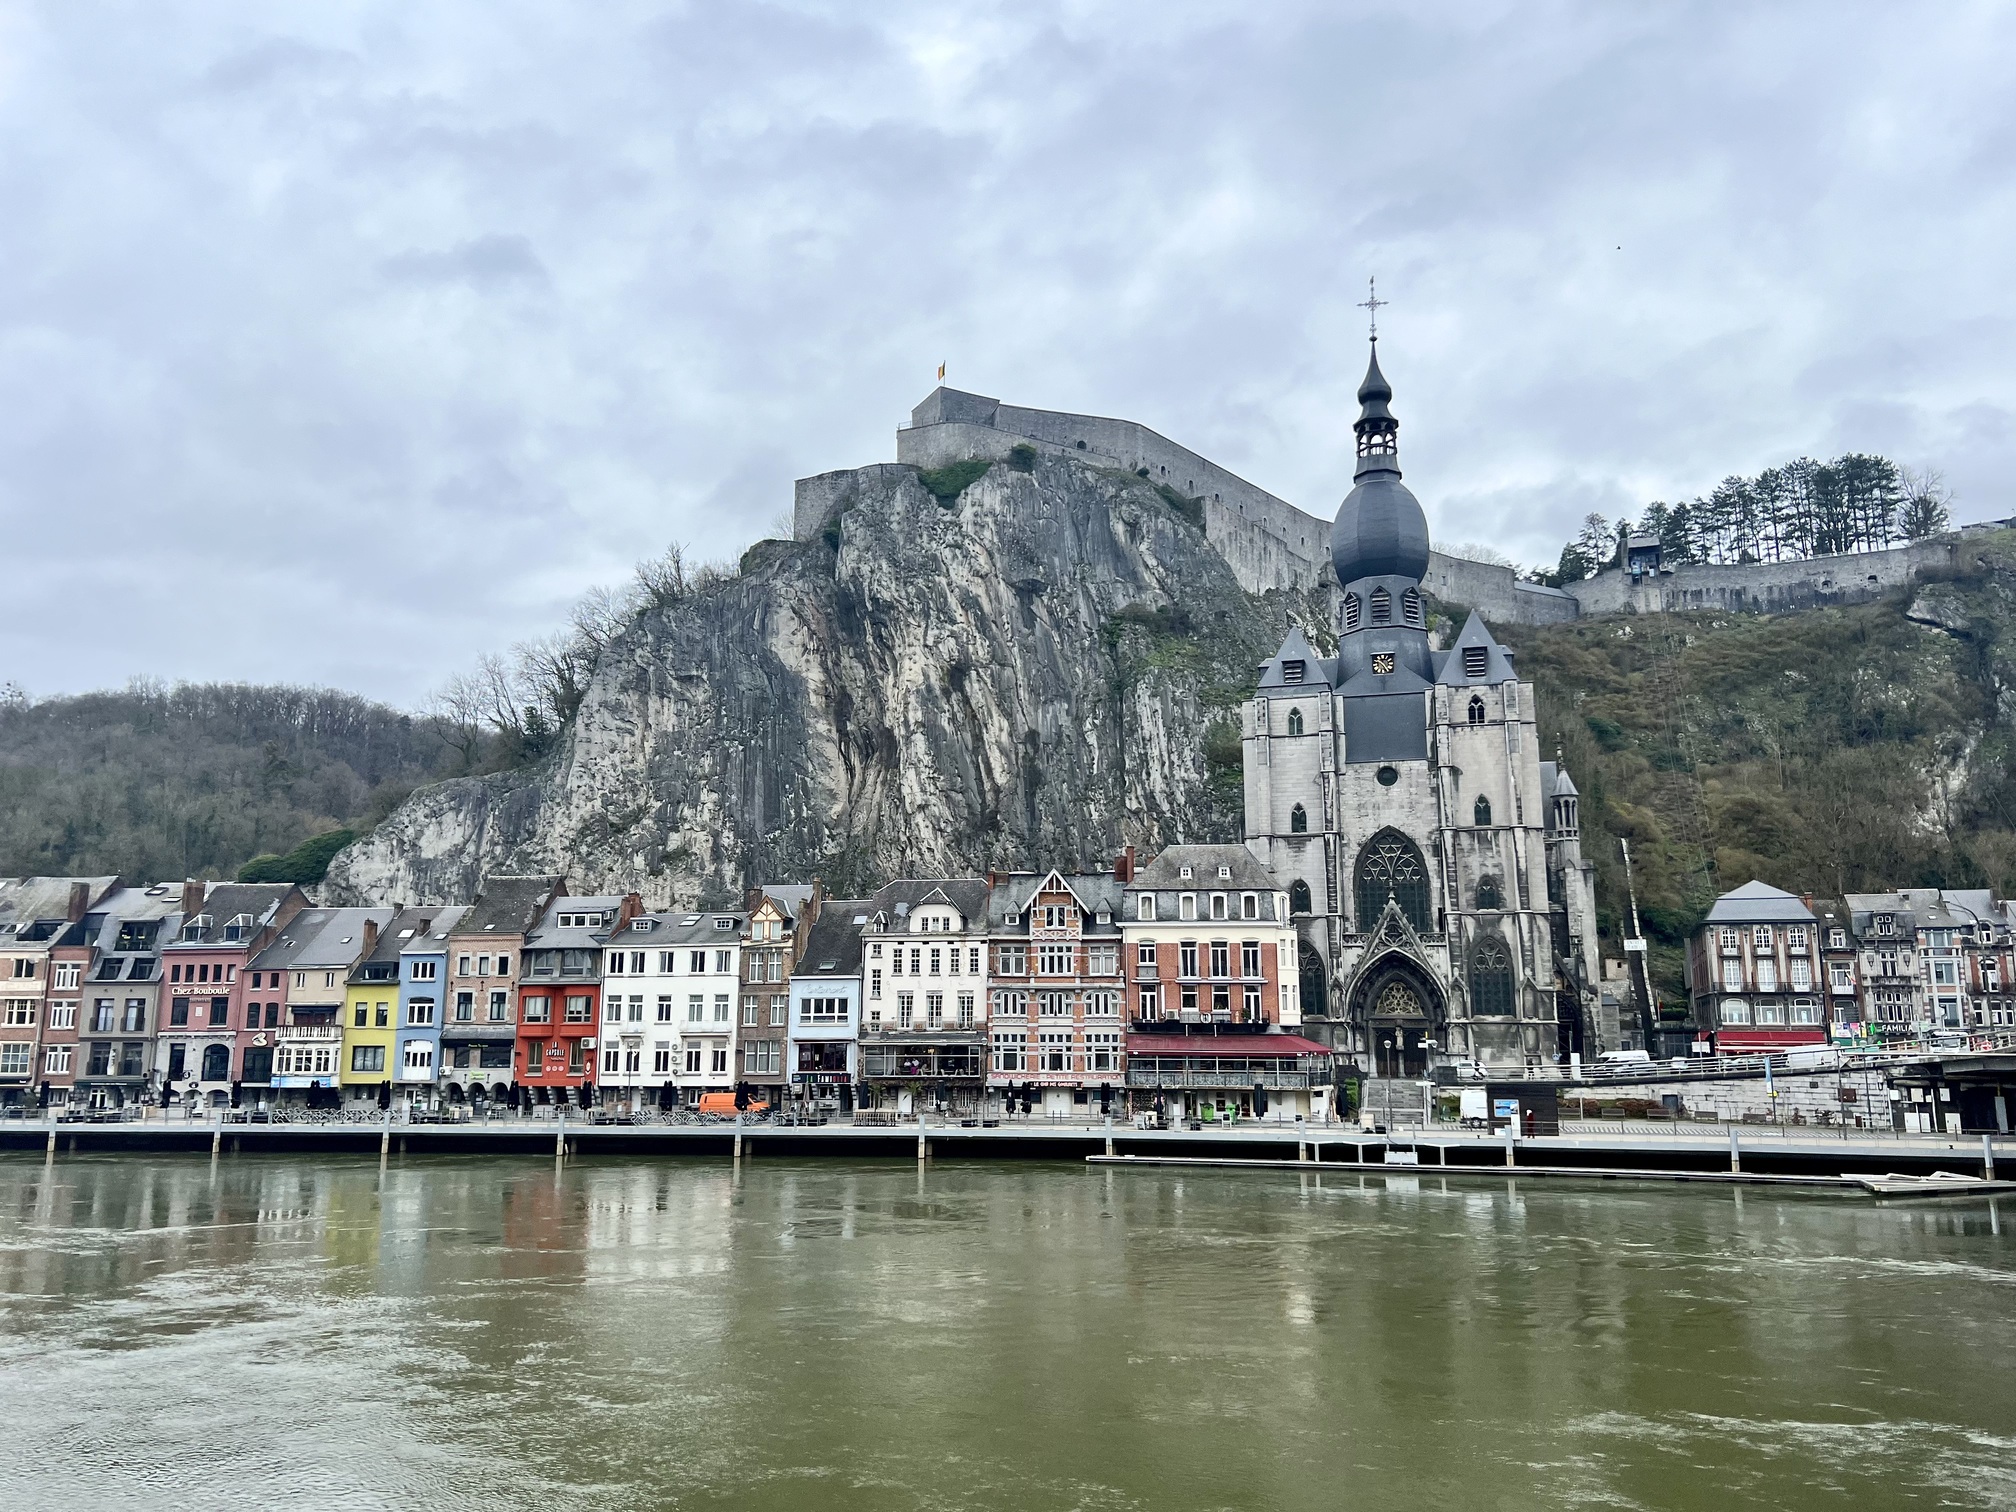 Enchanting view in Dinant, Belgium, with ornate medieval architecture and bustling activity, capturing the essence of Belgian heritage and culture.; travel guide to Dinant